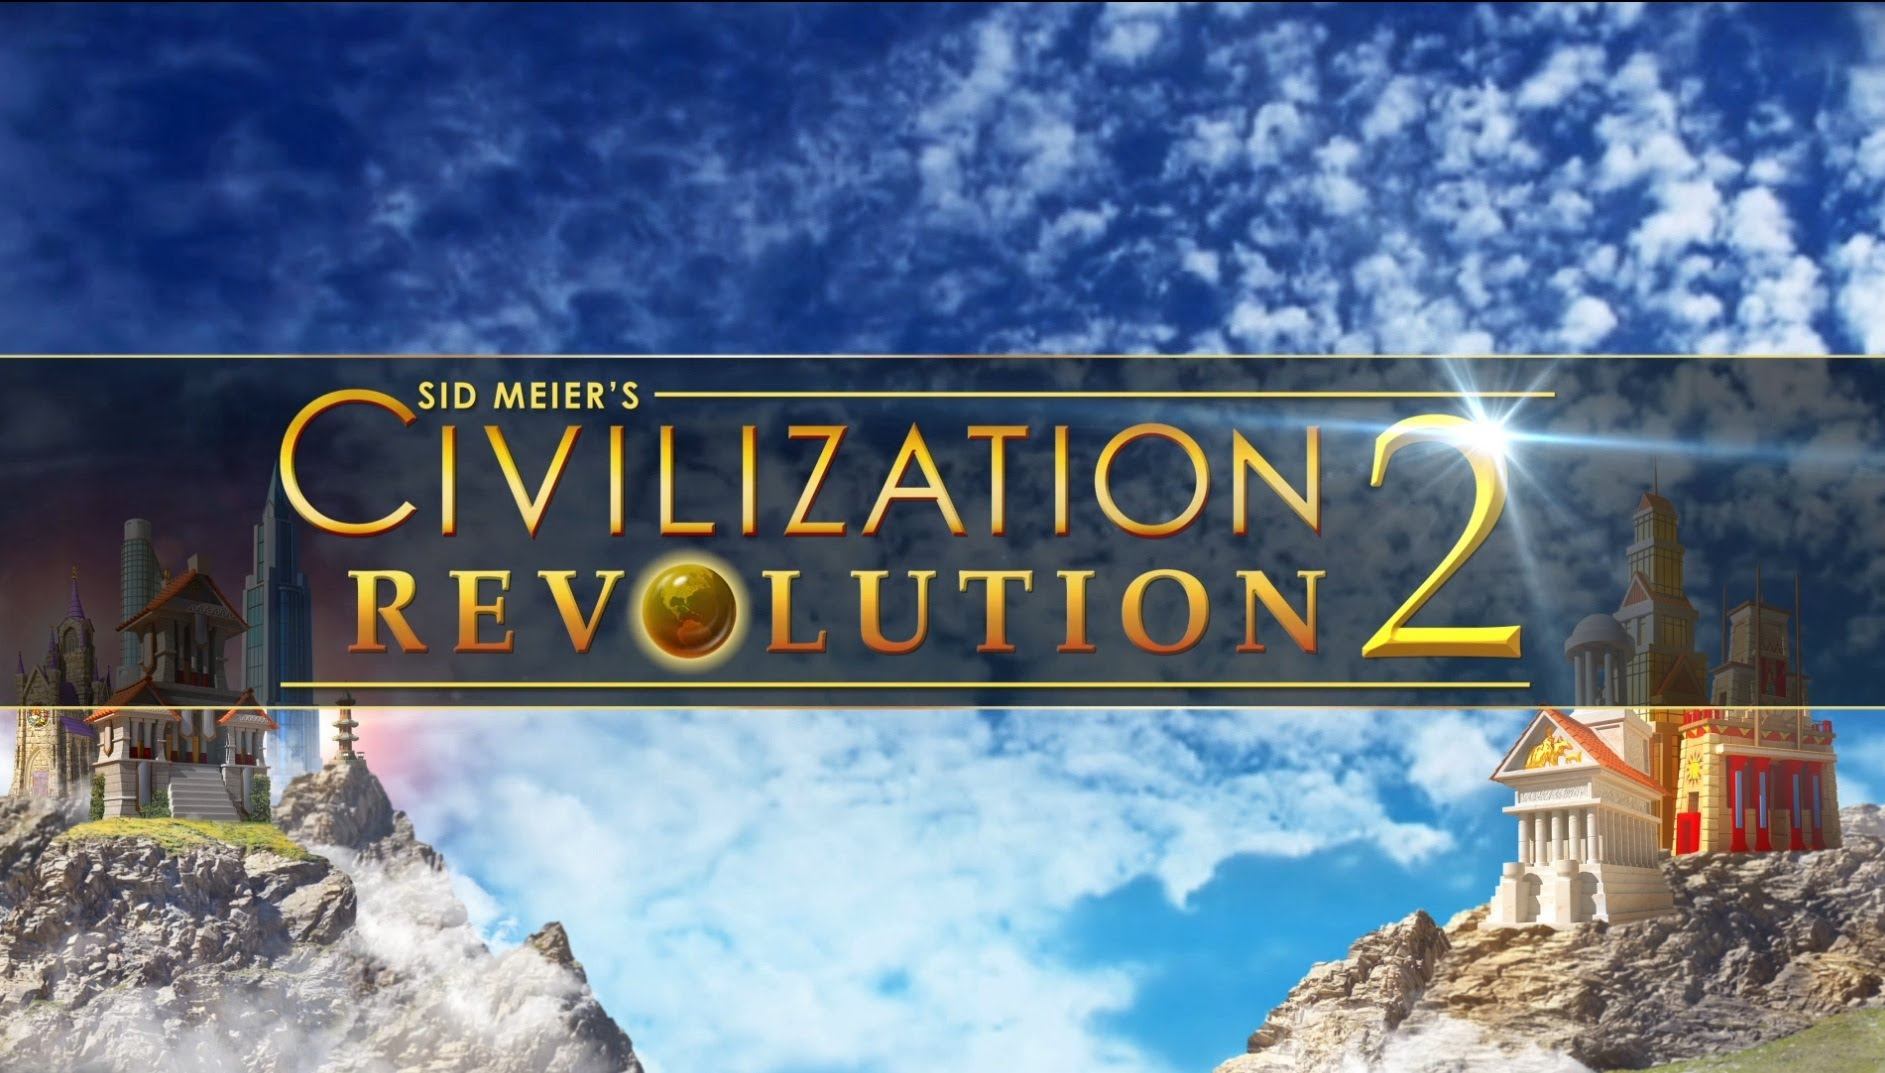 Civilization Revolution 2 Review: You Can’t Reinvent the Wheel